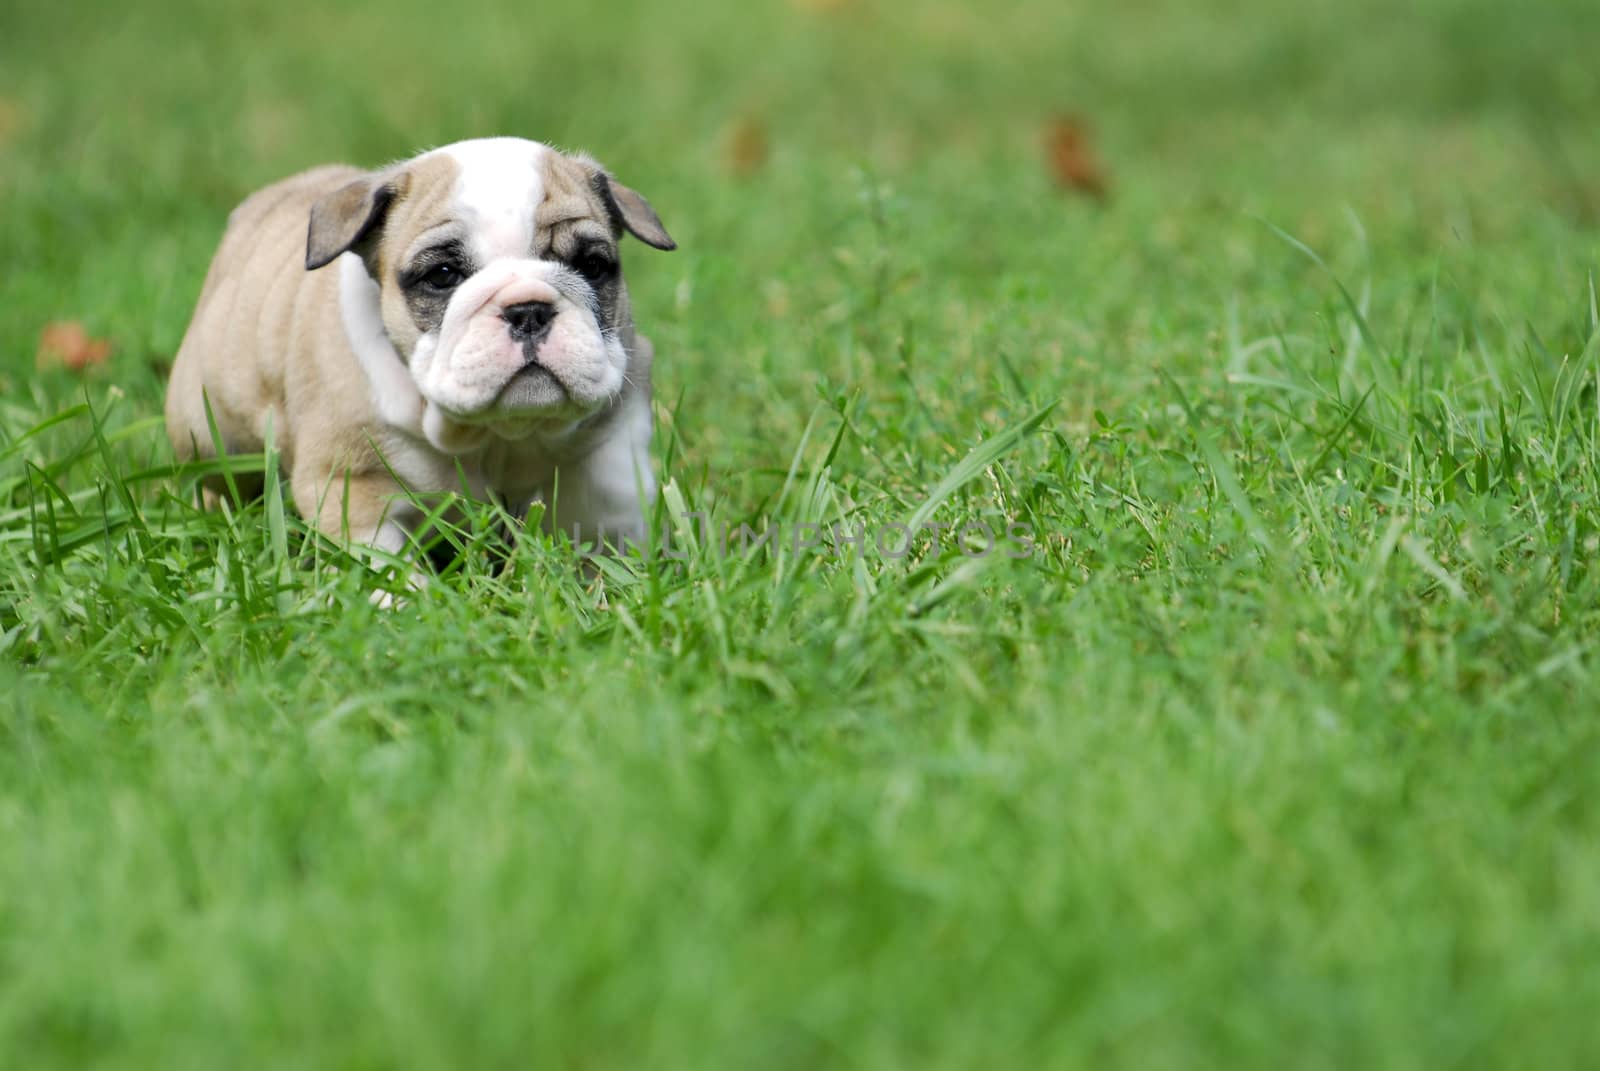 cute puppy in the grass by willeecole123